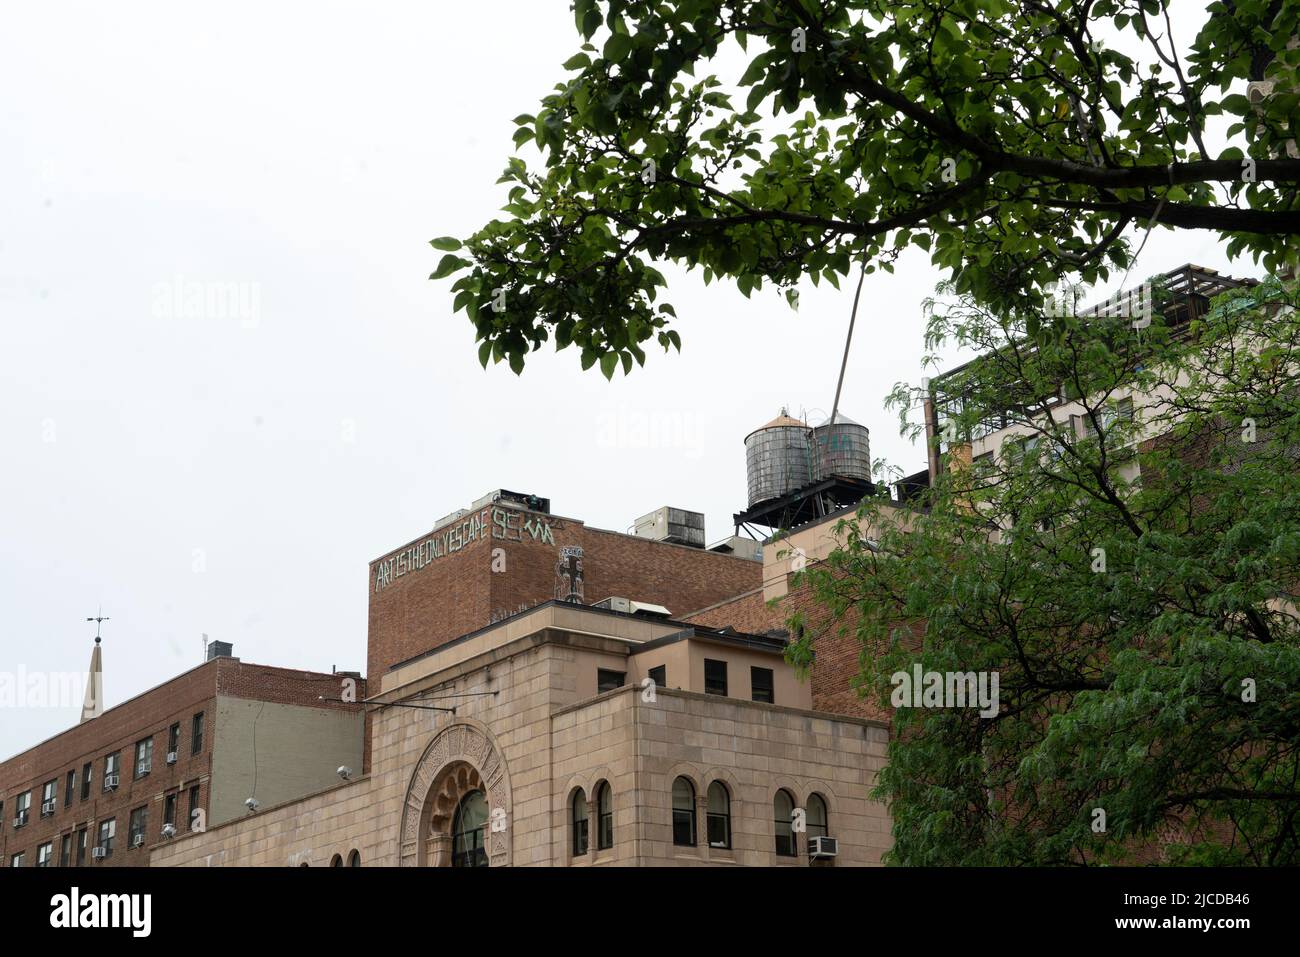 The skyline of Manhattan's East Village as seen from Second Ave. near 12th St. includes two water towers and the roof of a historic Yiddish theater. Stock Photo